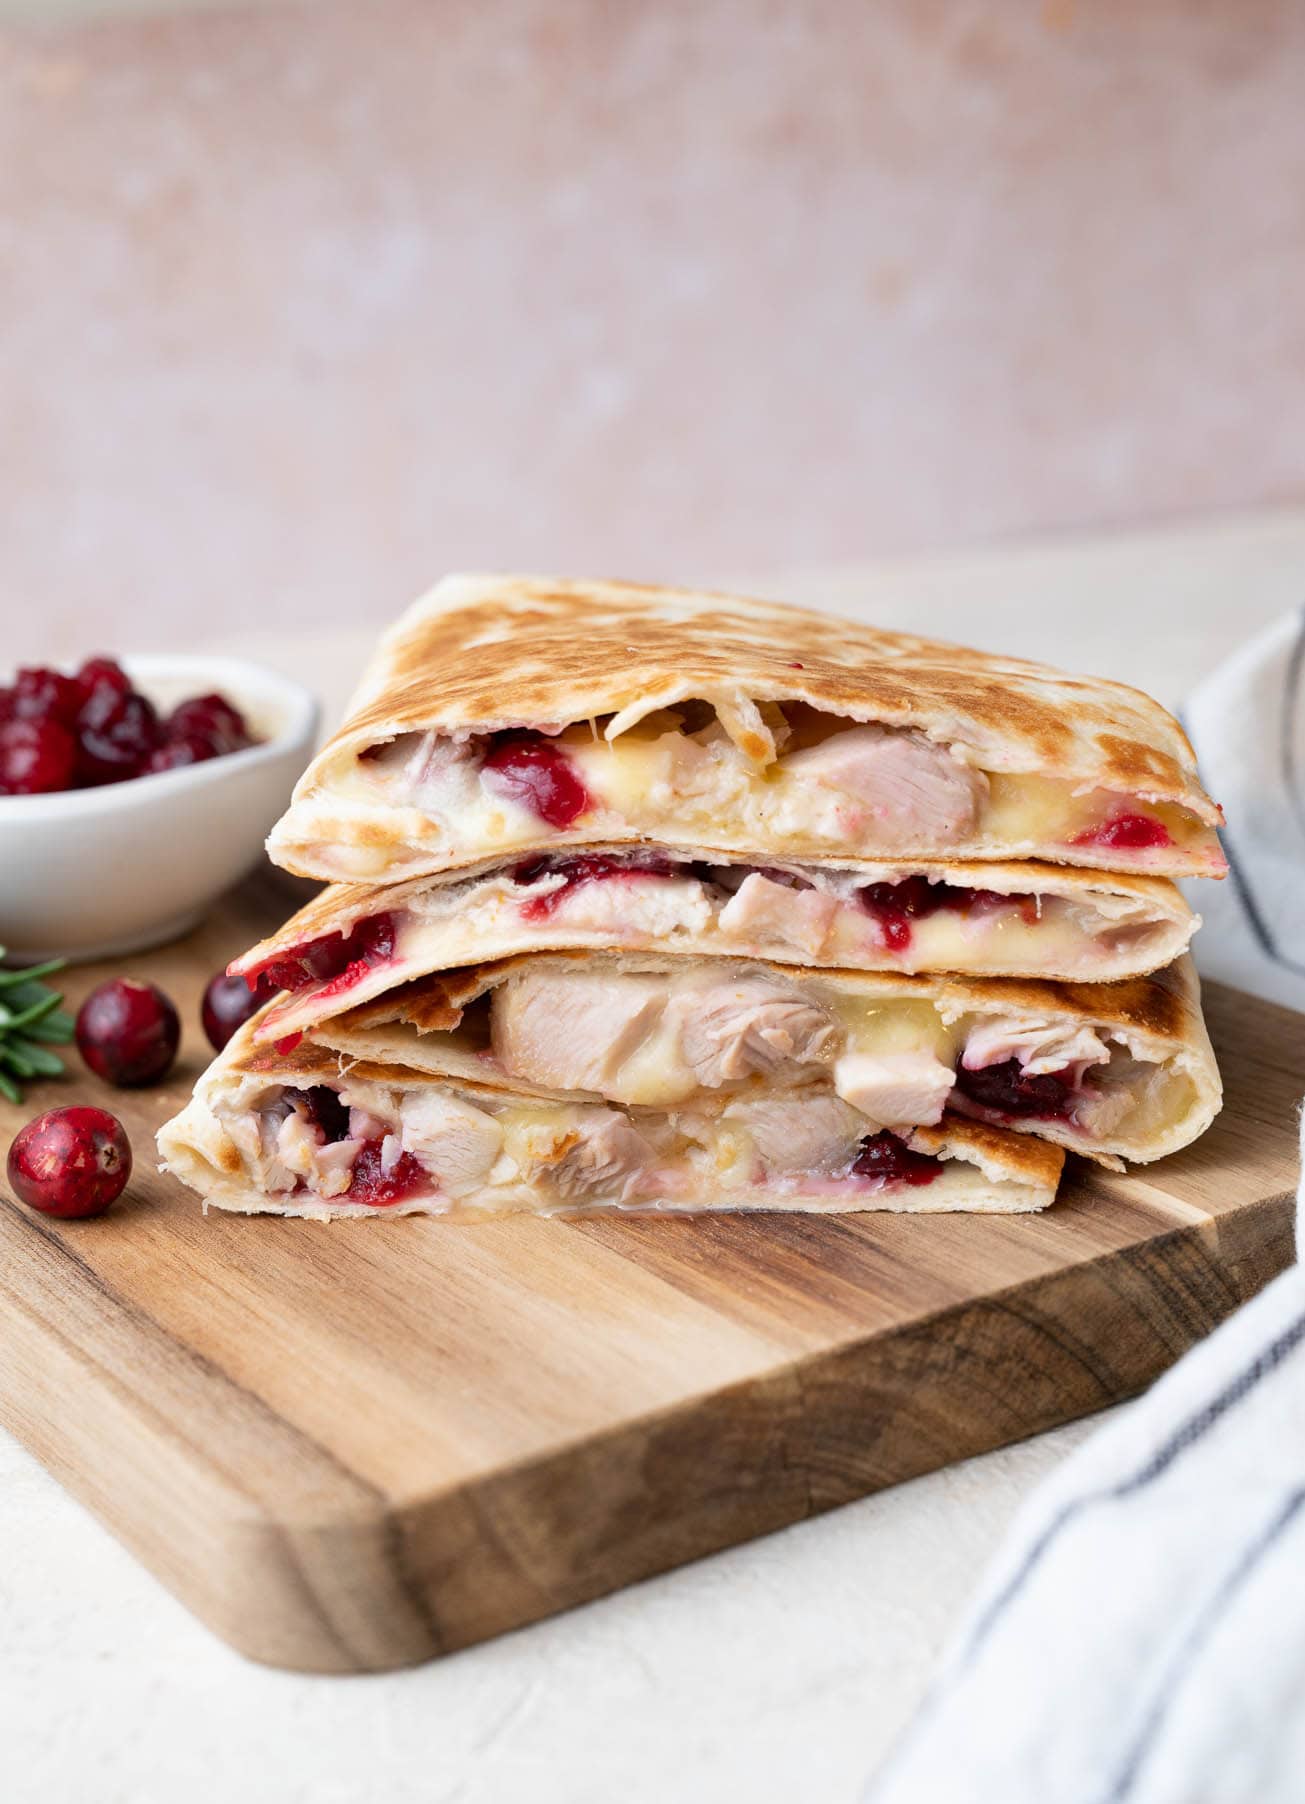 A stack of turkey quesadillas on a wooden board. Fresh cranberries and cranberry sauce in the background.